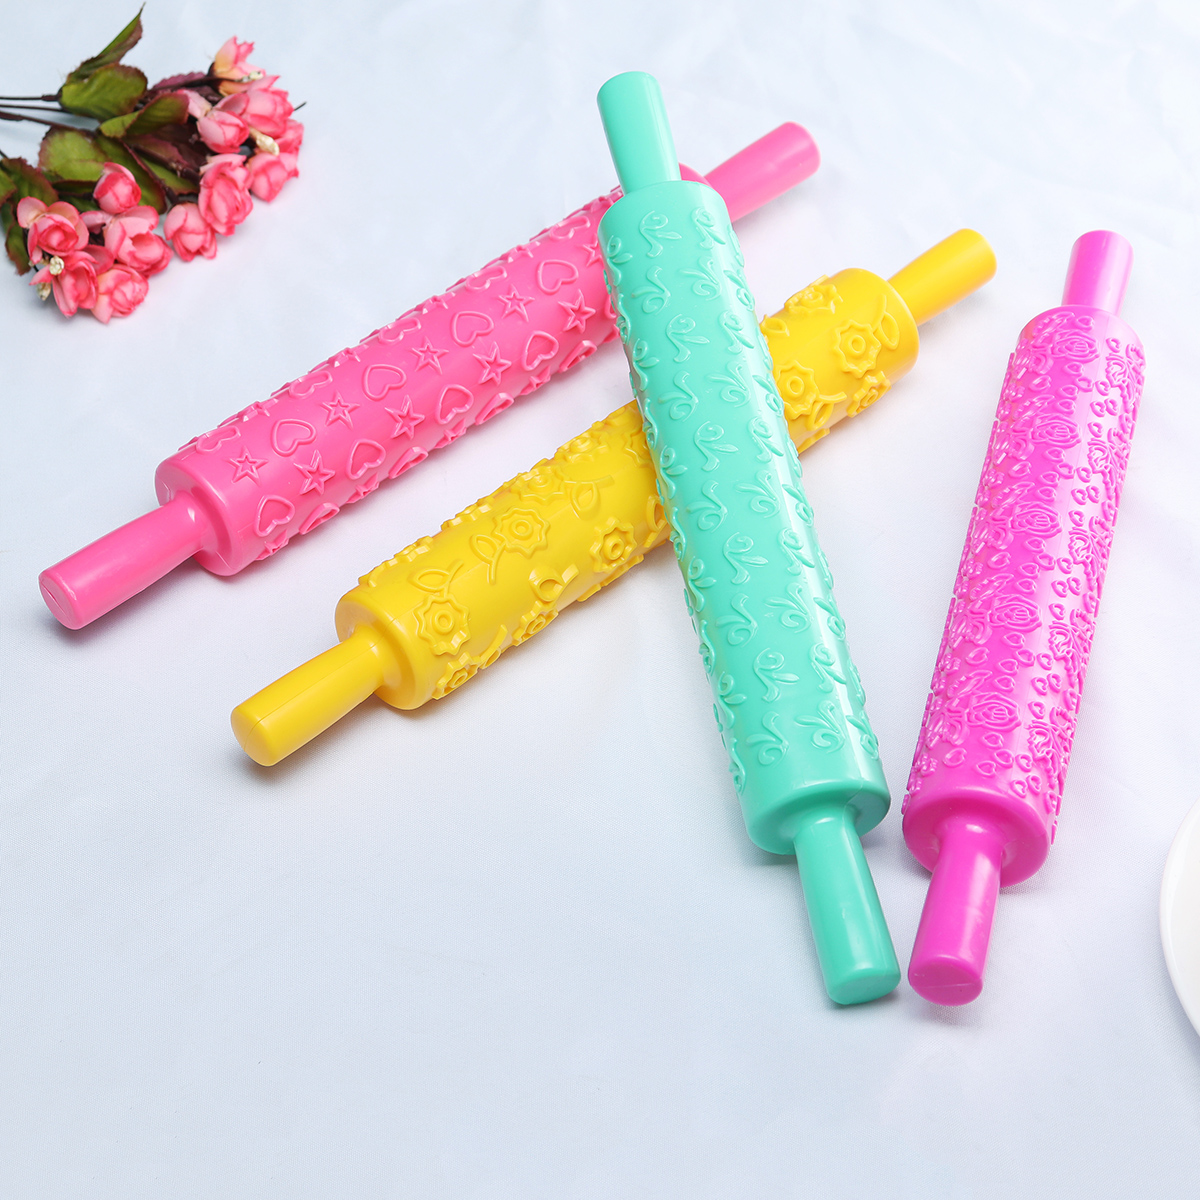 Baking-Rolling-Pin-Christmas-Creative-Baking-Biscuits-Cookie-Rolling-Rod-Pin-Printing-Mold-1410720-2